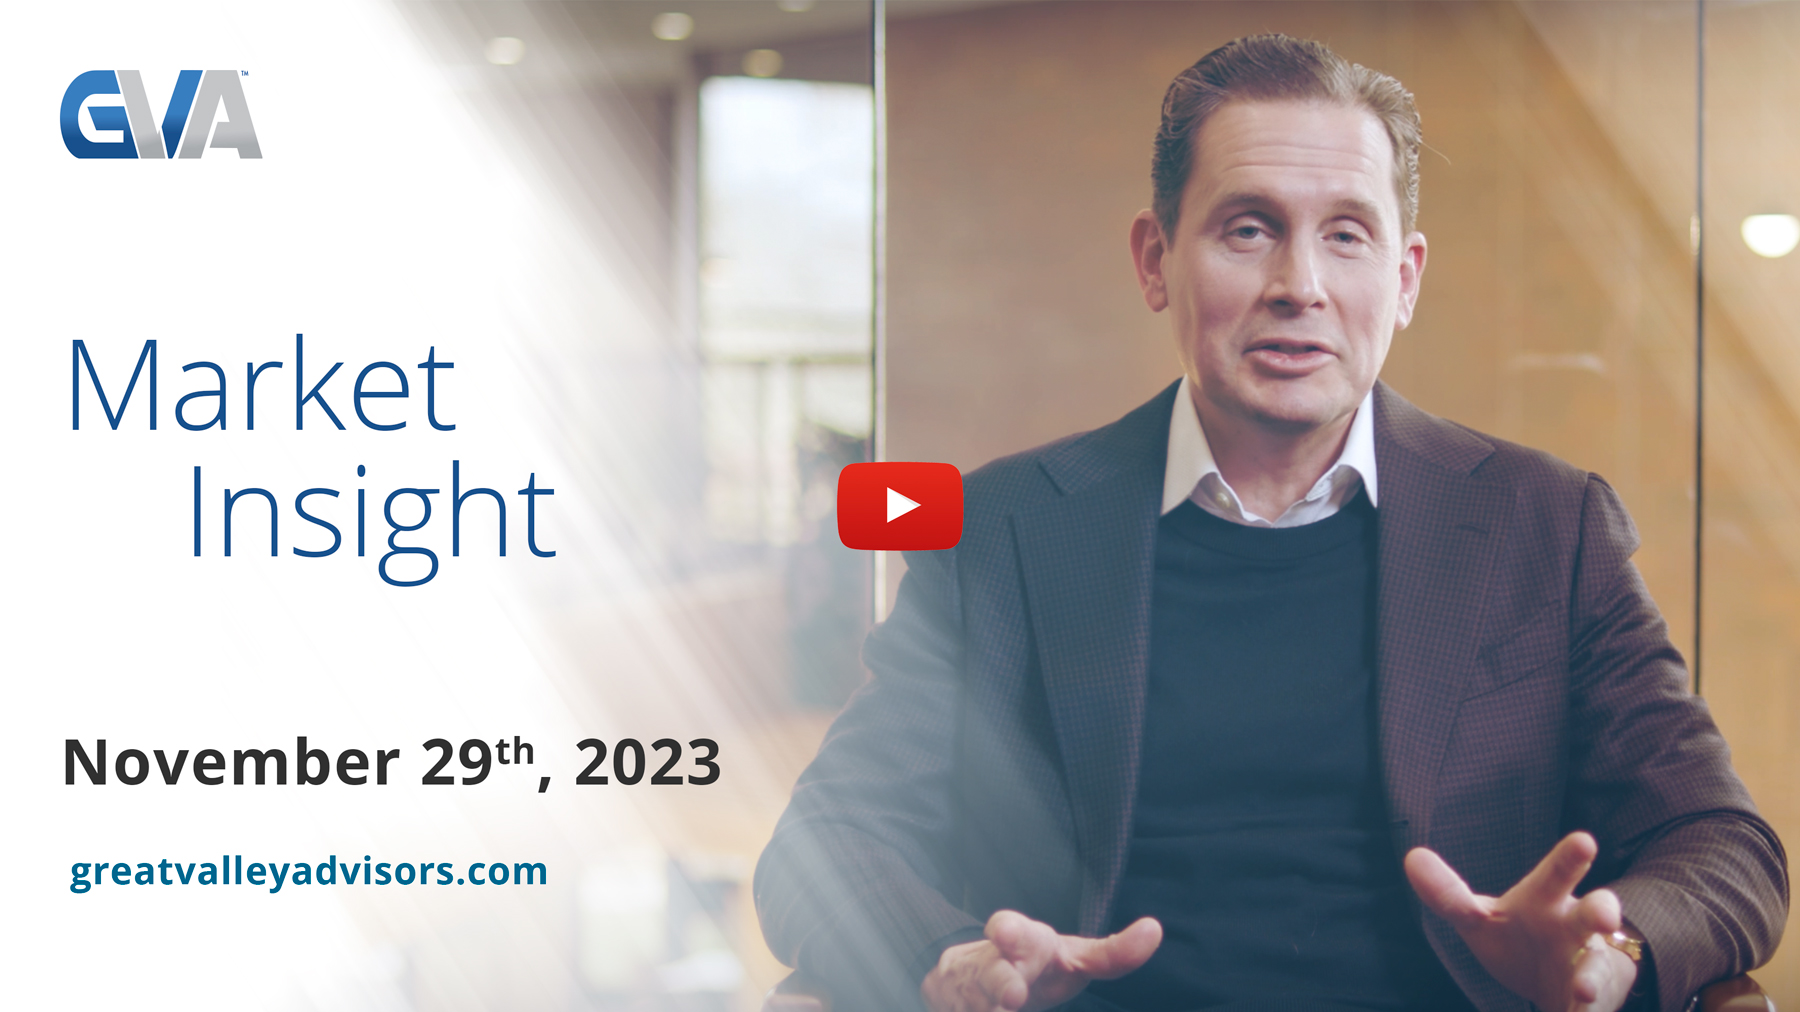 Market Insights with Eric: Episode 14, November 29th, 2023